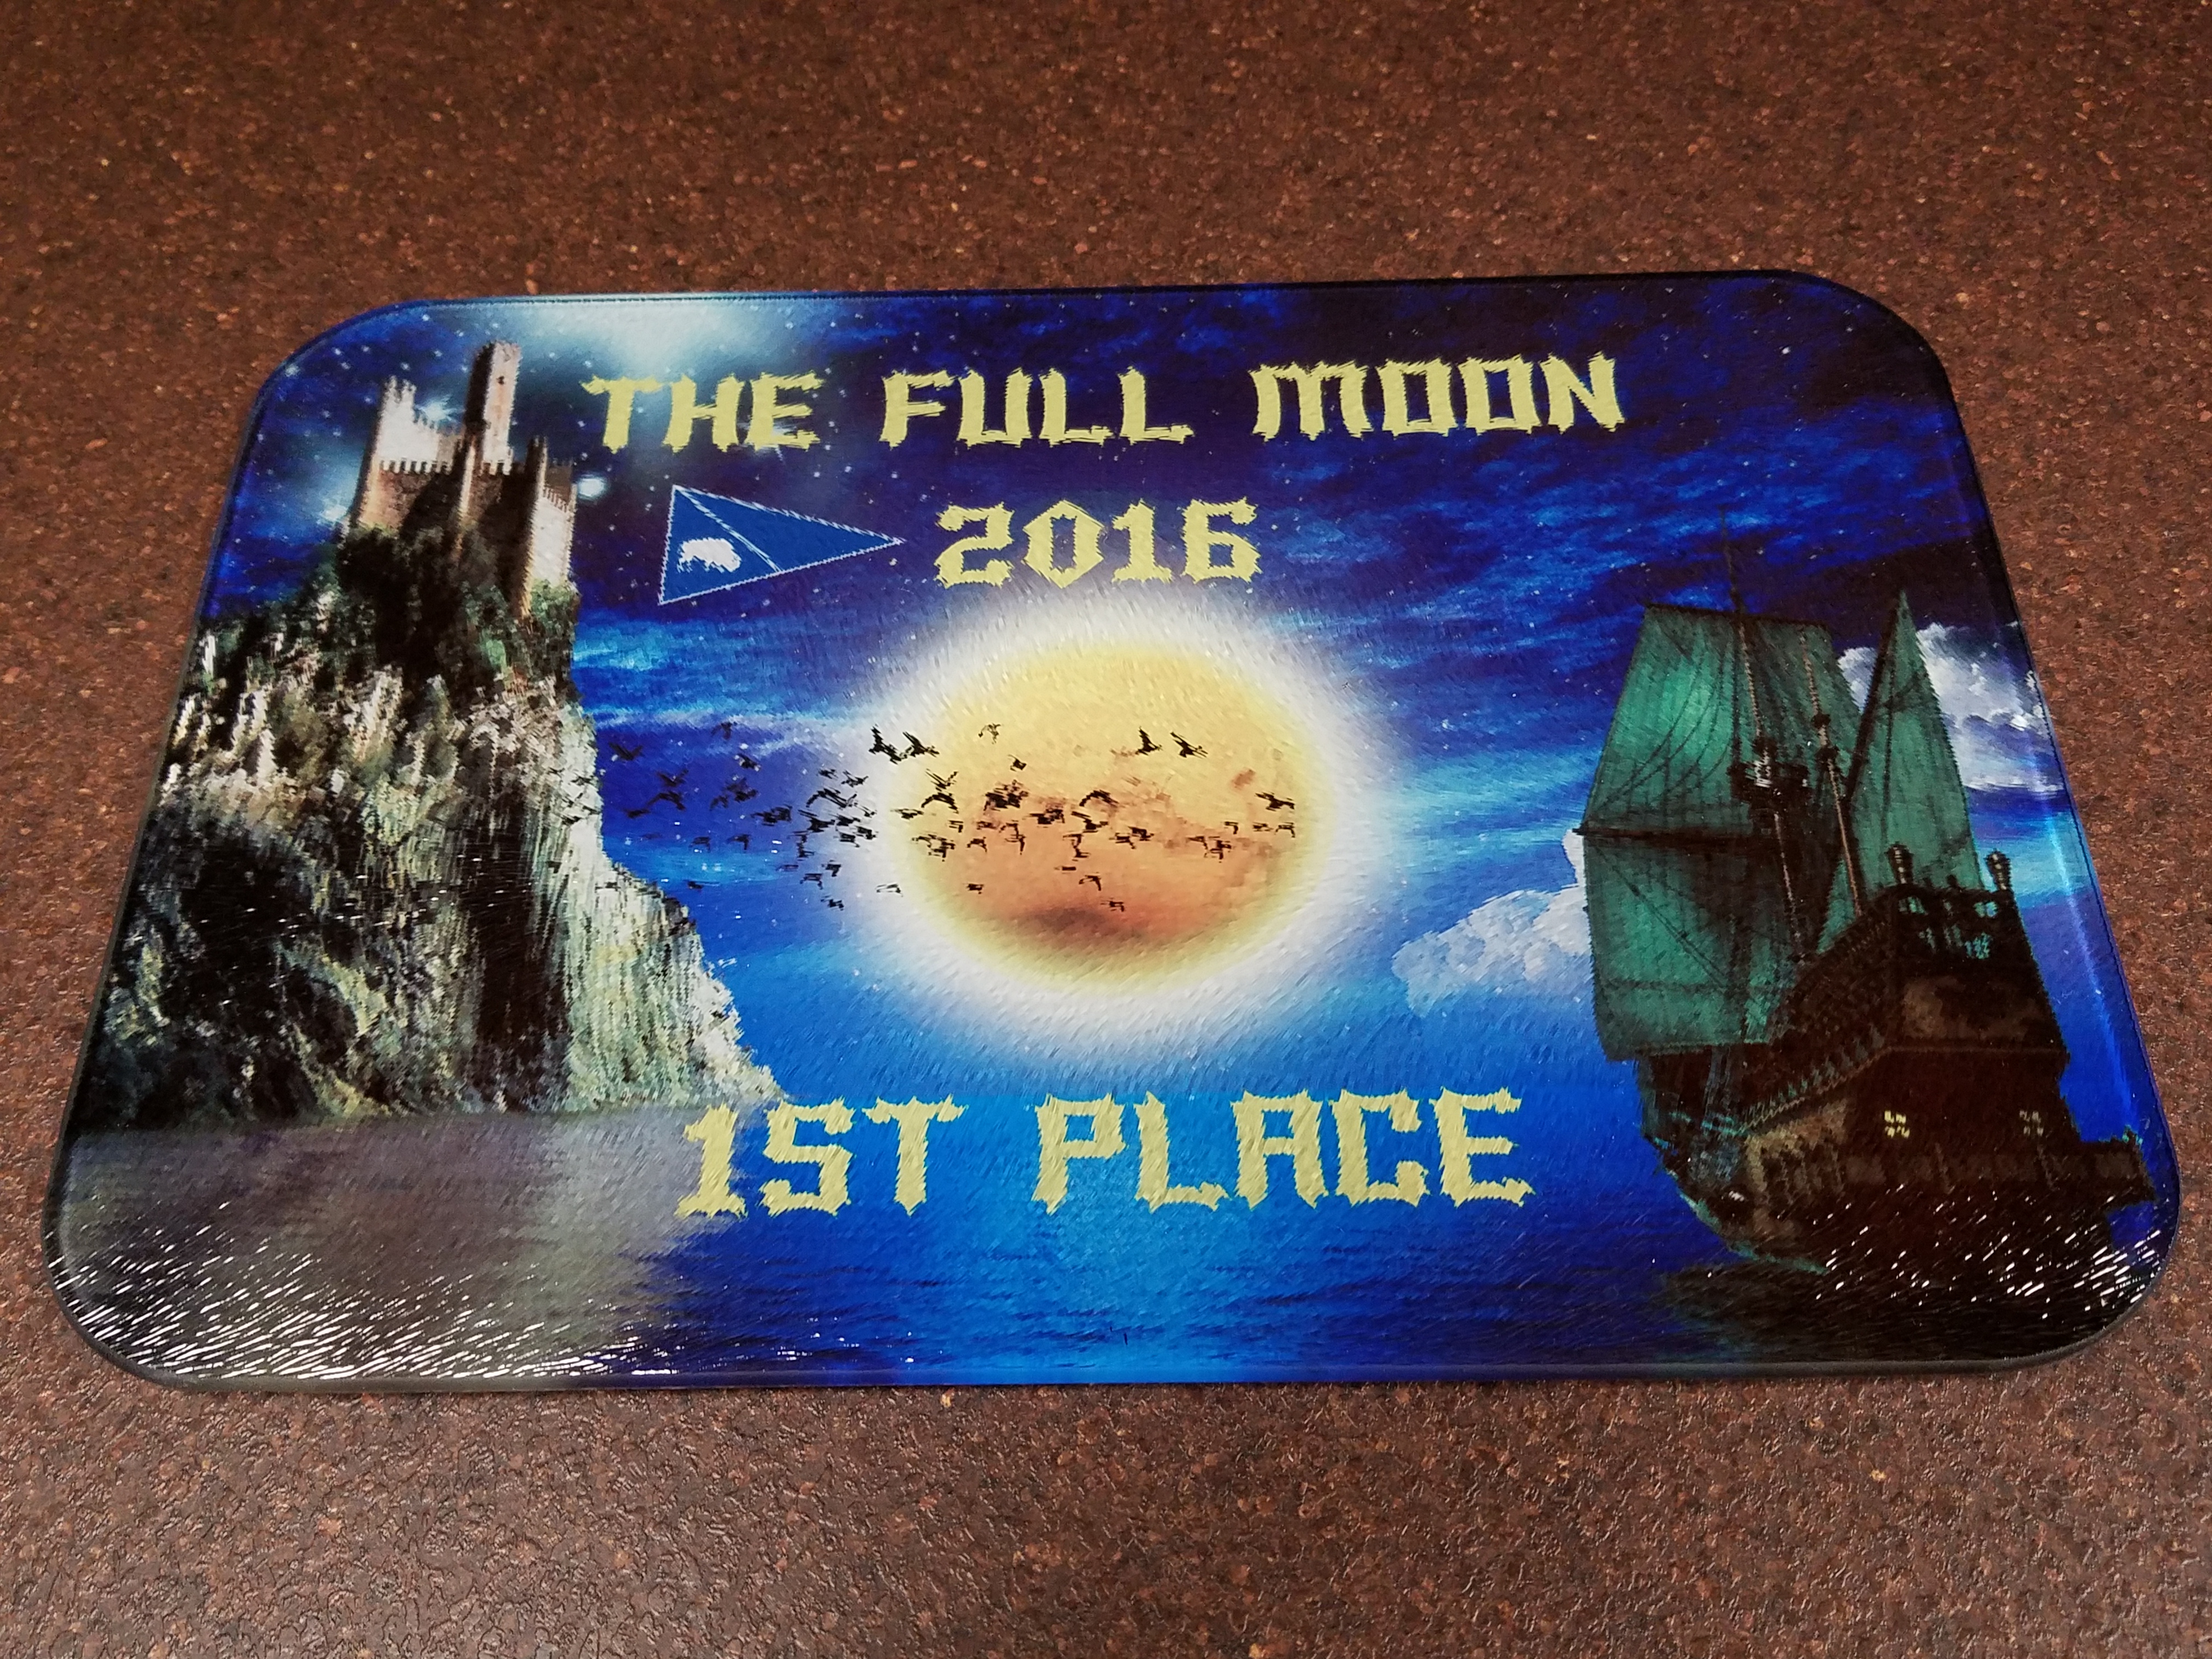 2016 Full Moon made with sublimation printing